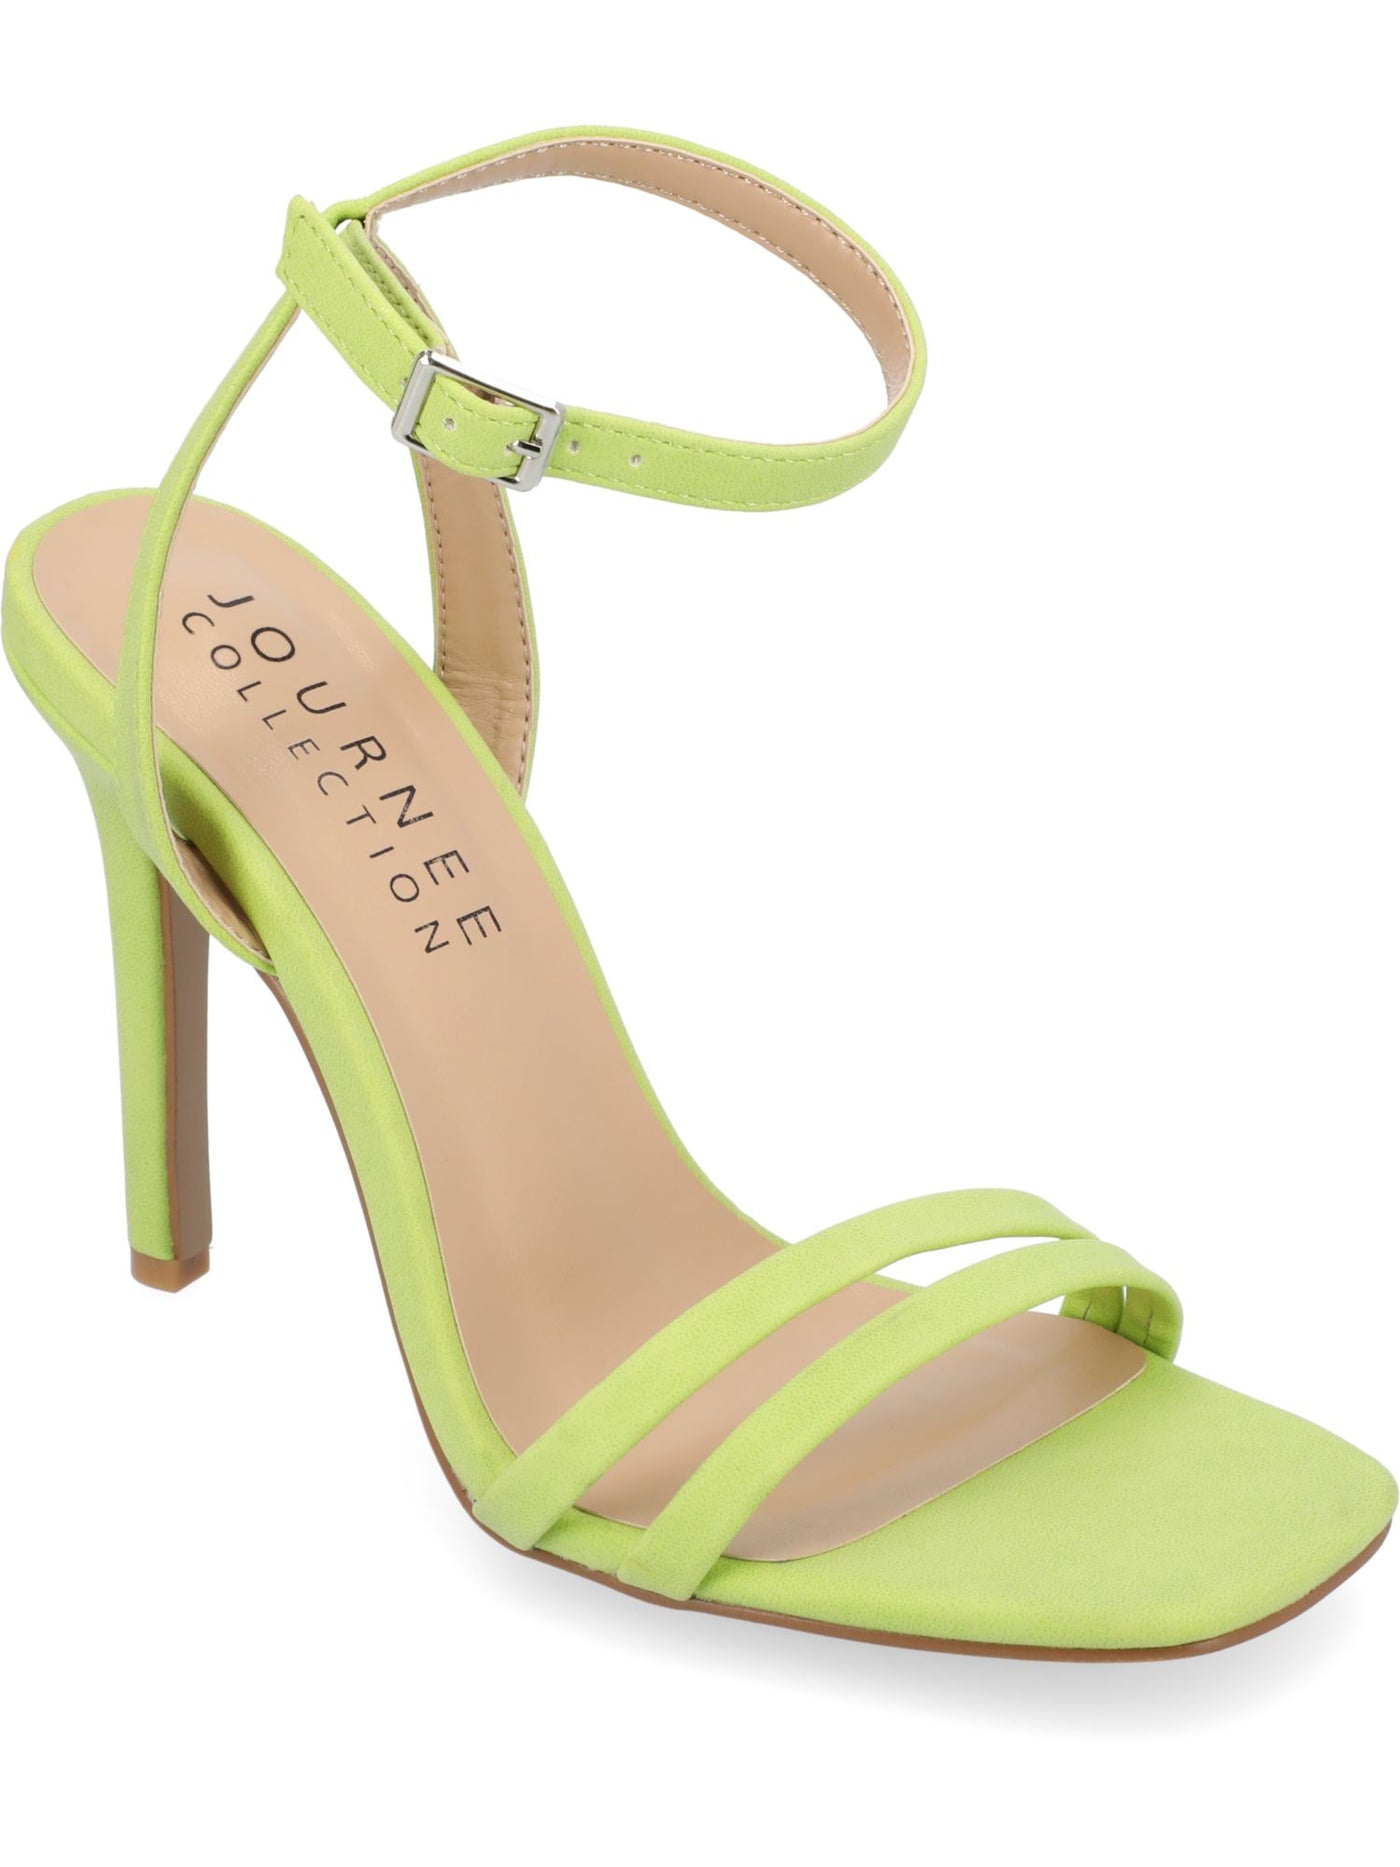 JOURNEE COLLECTION Womens Green Ankle Strap Padded Yevva Square Toe Stiletto Buckle Heeled Sandal 12